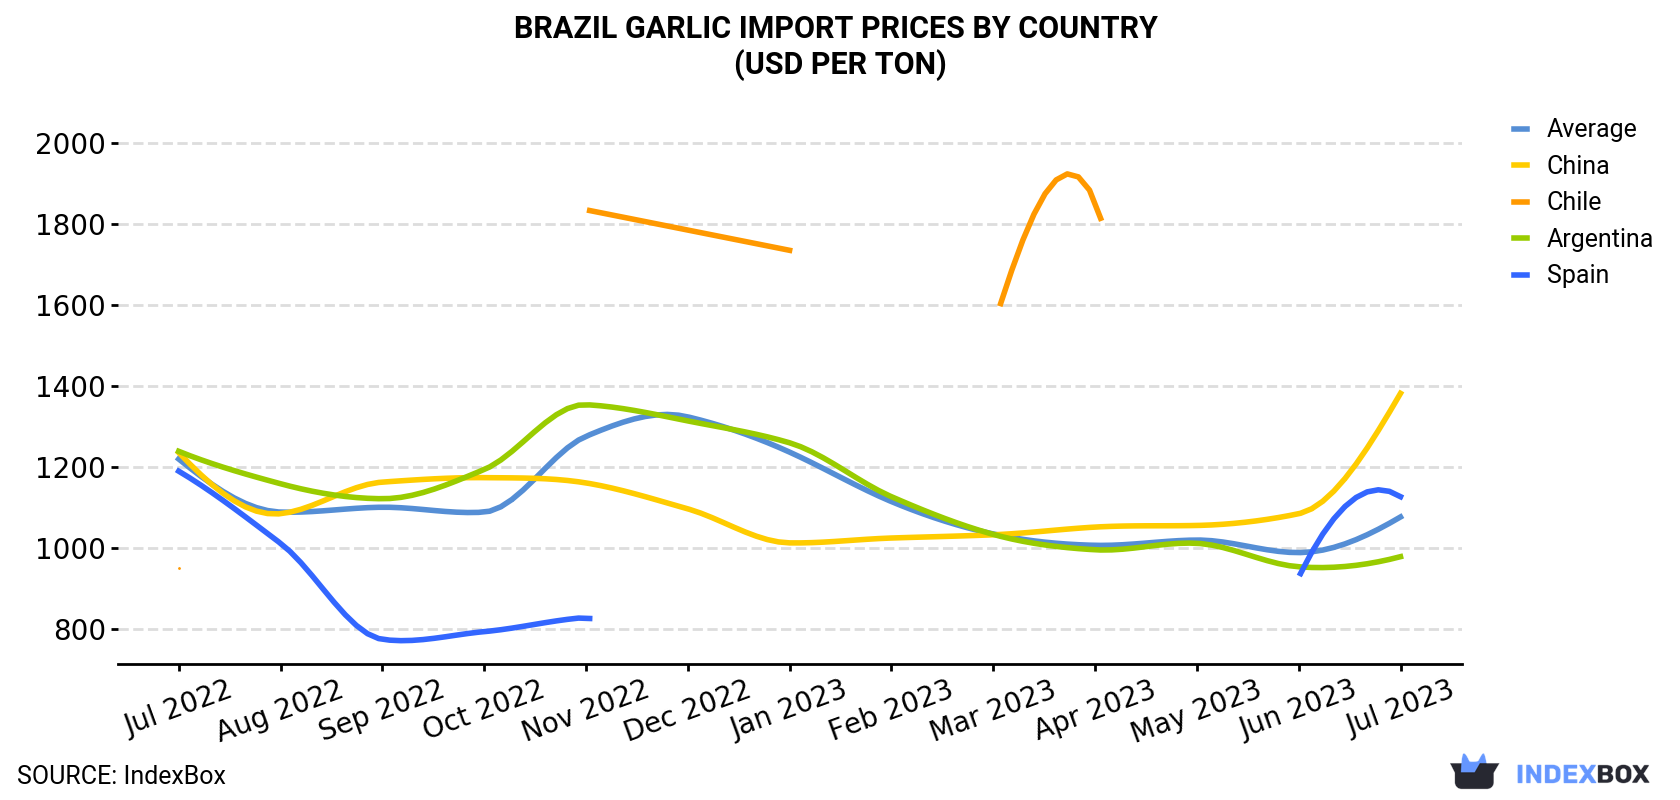 Brazil Garlic Import Prices By Country (USD Per Ton)